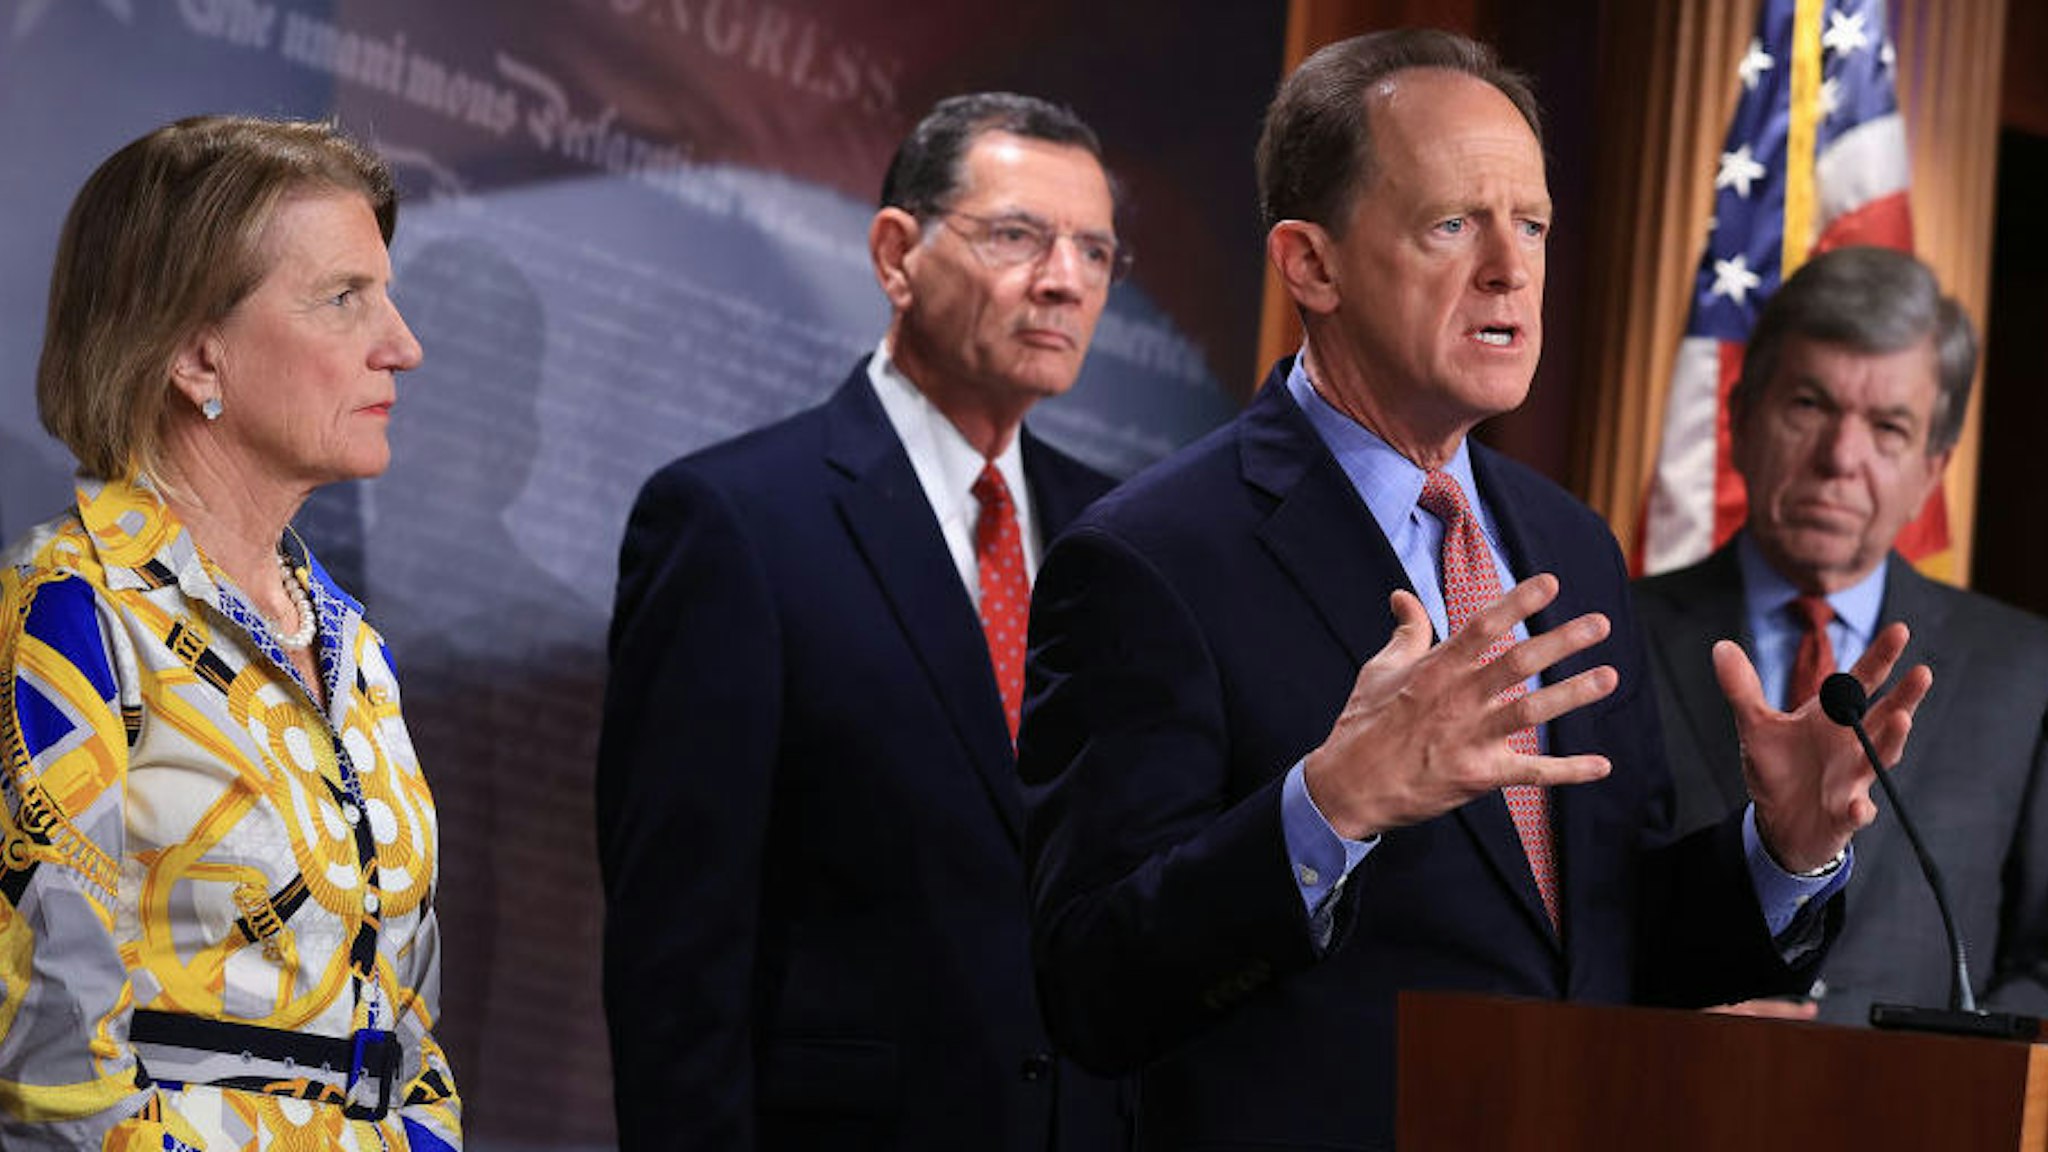 WASHINGTON, DC - MAY 27: Sen. Pat Toomey (R-PA) speaks during a news conference with Sen. Shelley Moore Capito (R-WV) (L), lead Republican negotiator with the Biden administration on infrastructure, Sen. John Barrasso (R-WY) and Sen. Roy Blunt (R-MO) (R) about the GOP's $928 billion counteroffer at the U.S. Capitol on May 27, 2021 in Washington, DC. Insisting that the 2017 Trump tax cuts remain untouched, Senate Republicans suggested that money not spent as part of the COVID-19 American Rescue Plan be diverted to infrastructure.